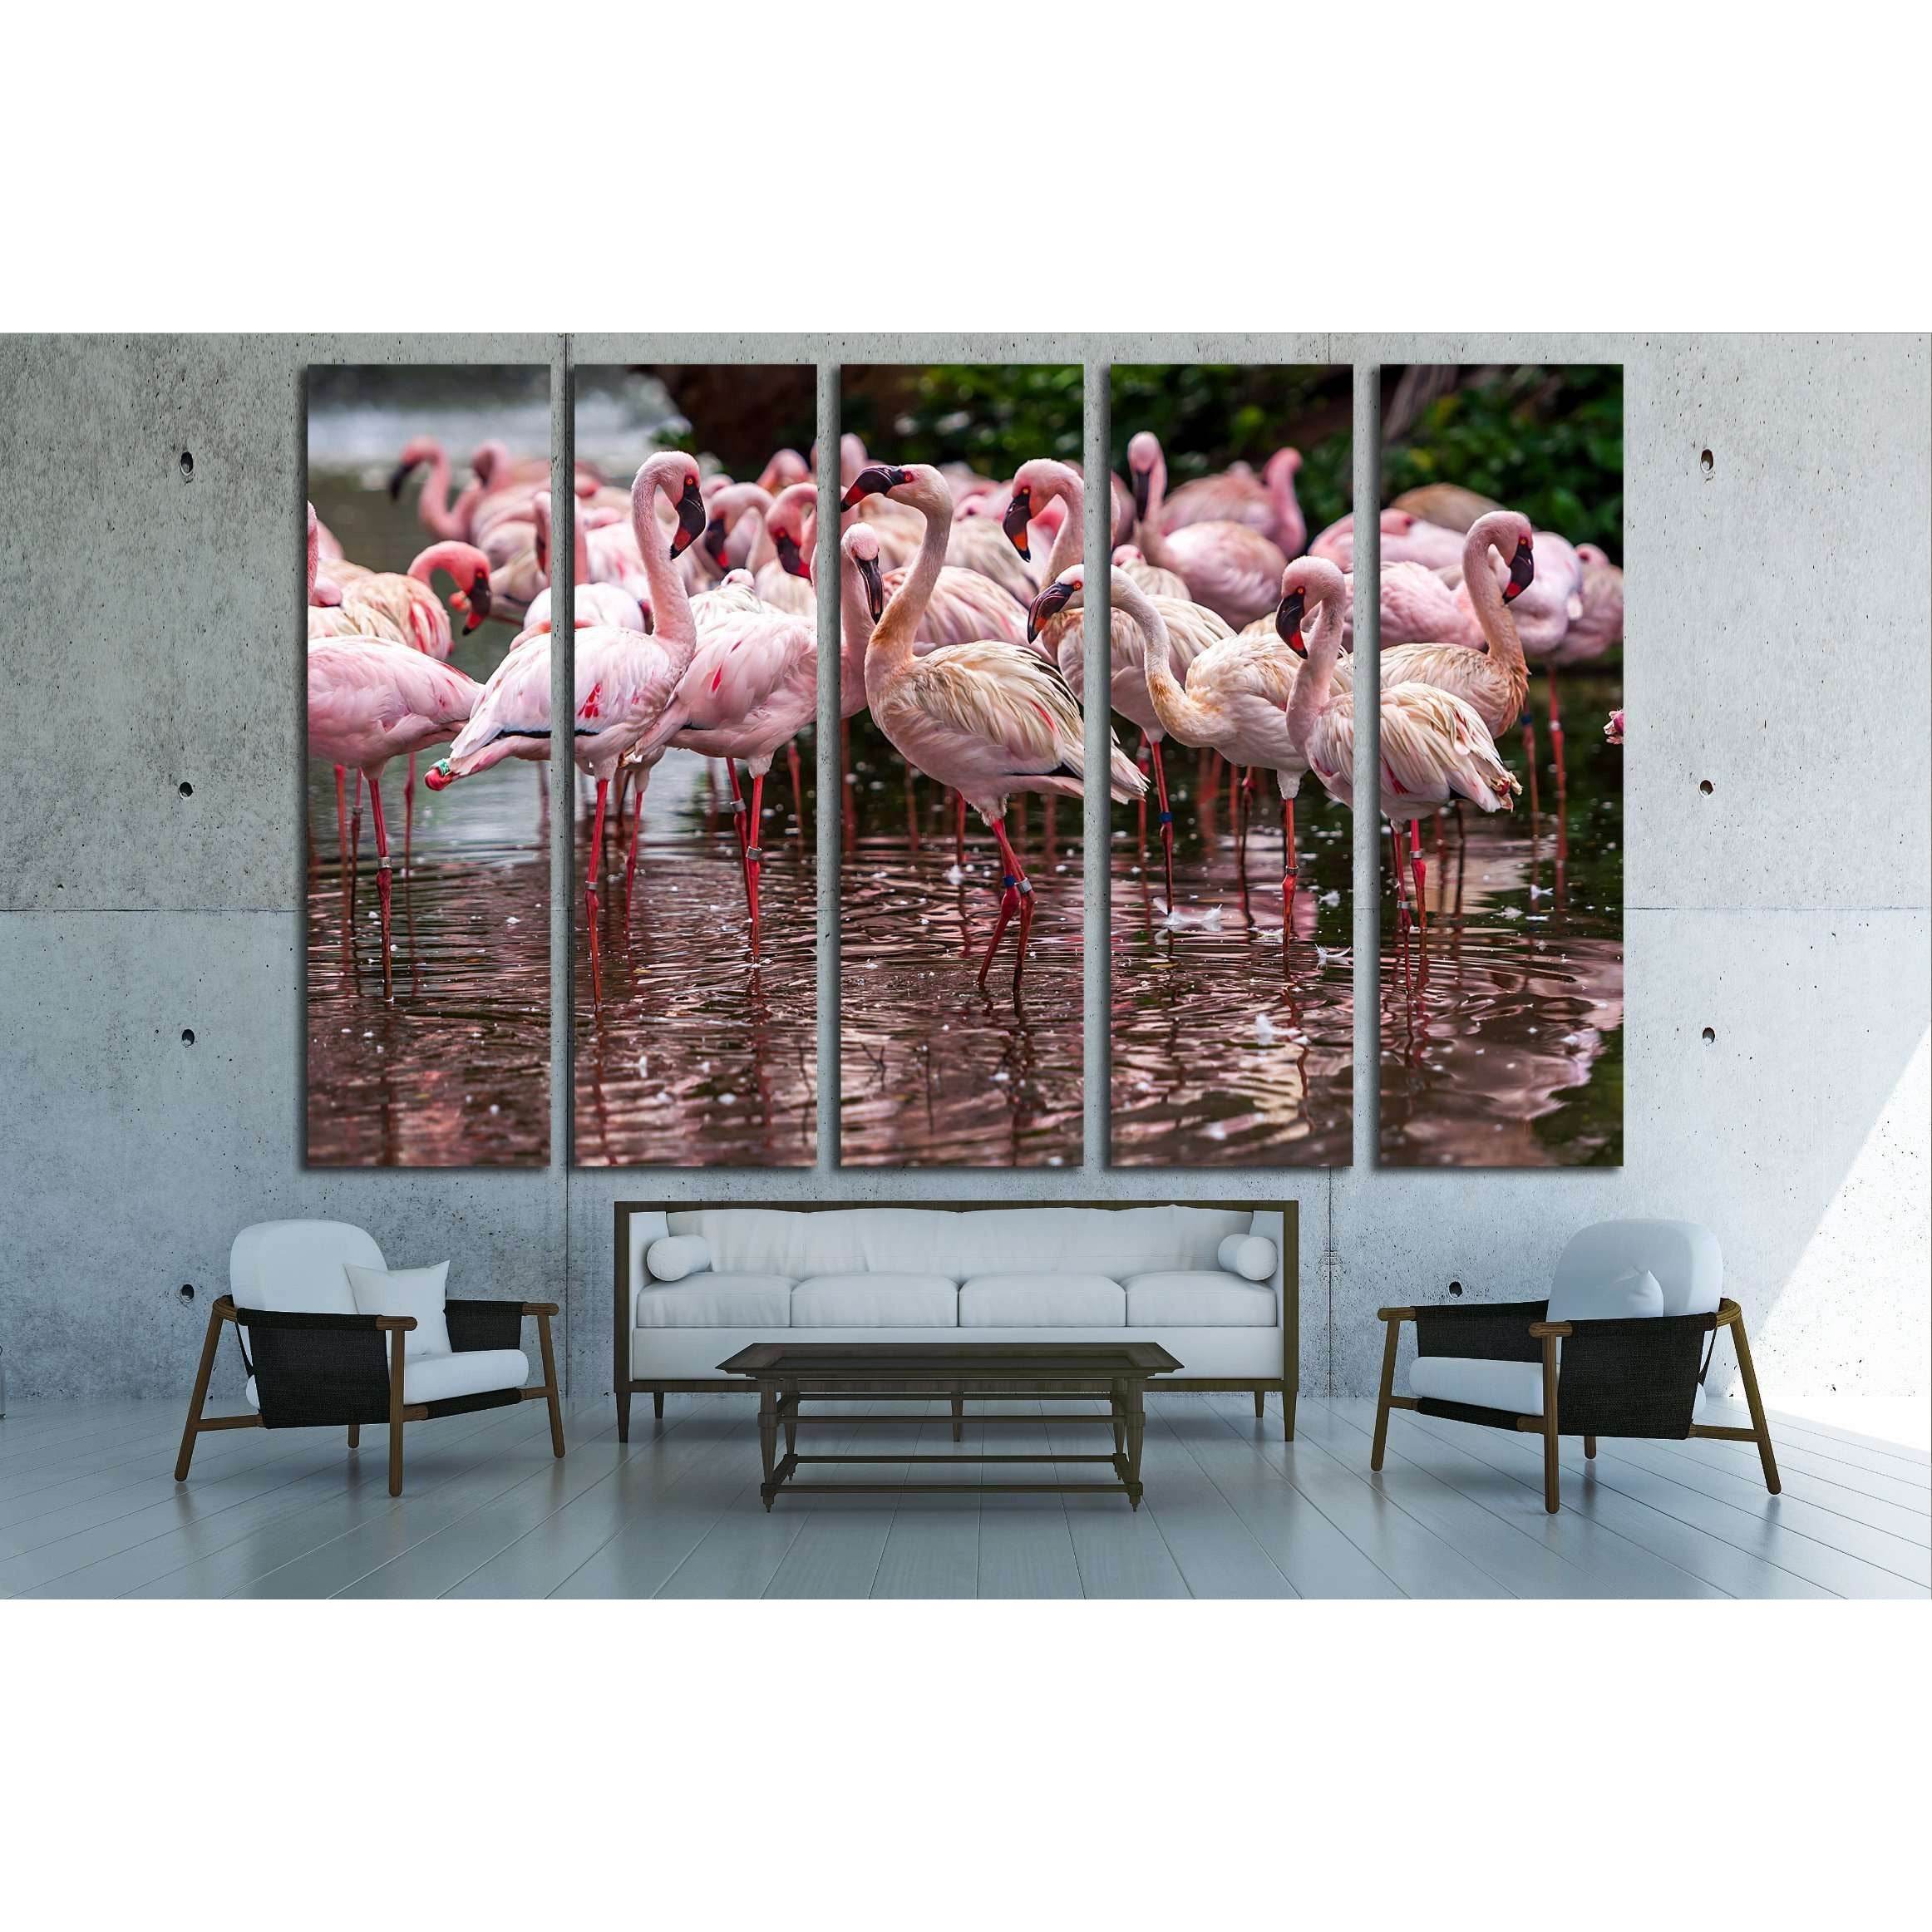 A flock of pink flamingos and reflection in the water №2795 Ready to Hang Canvas Print